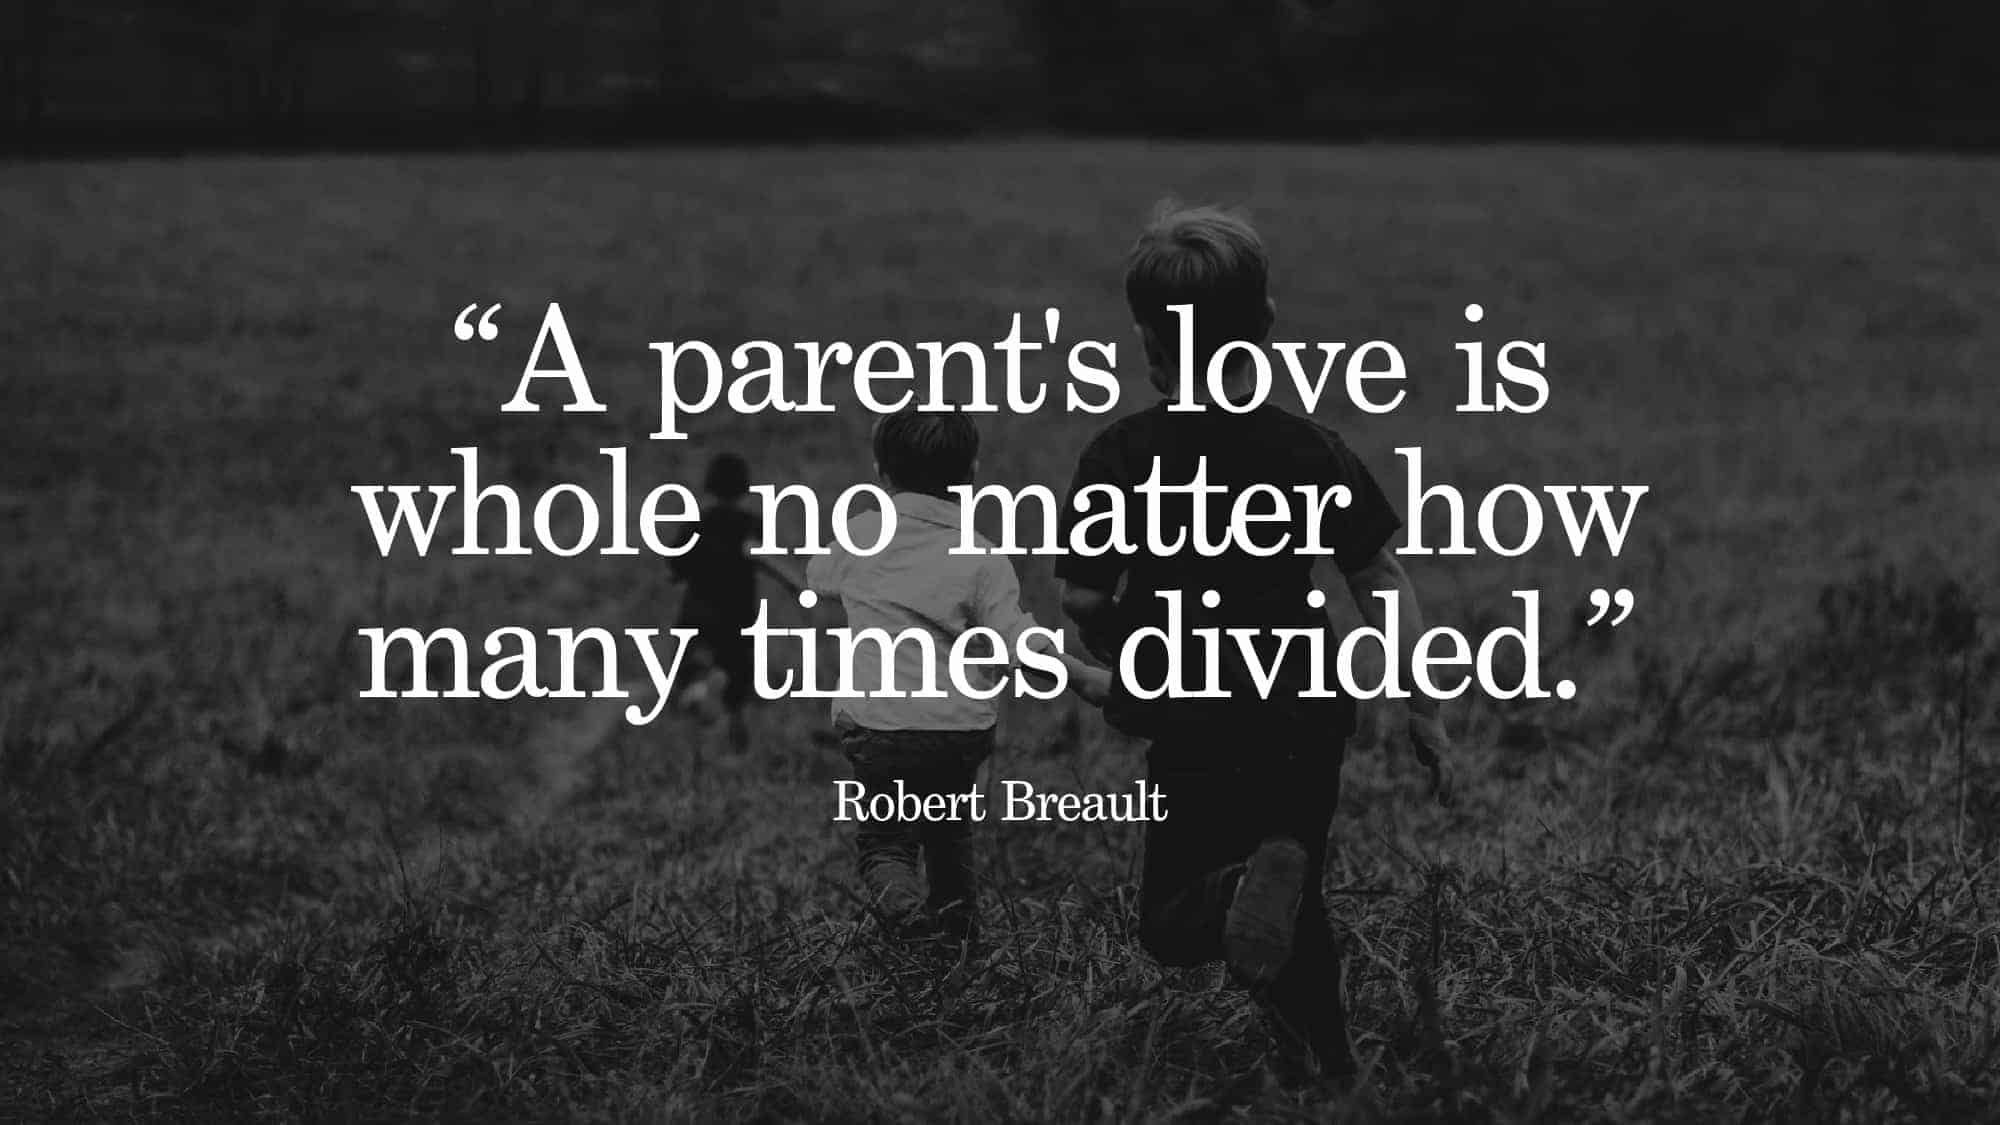 15 Lovely Quotes About Parenthood Never to Forget